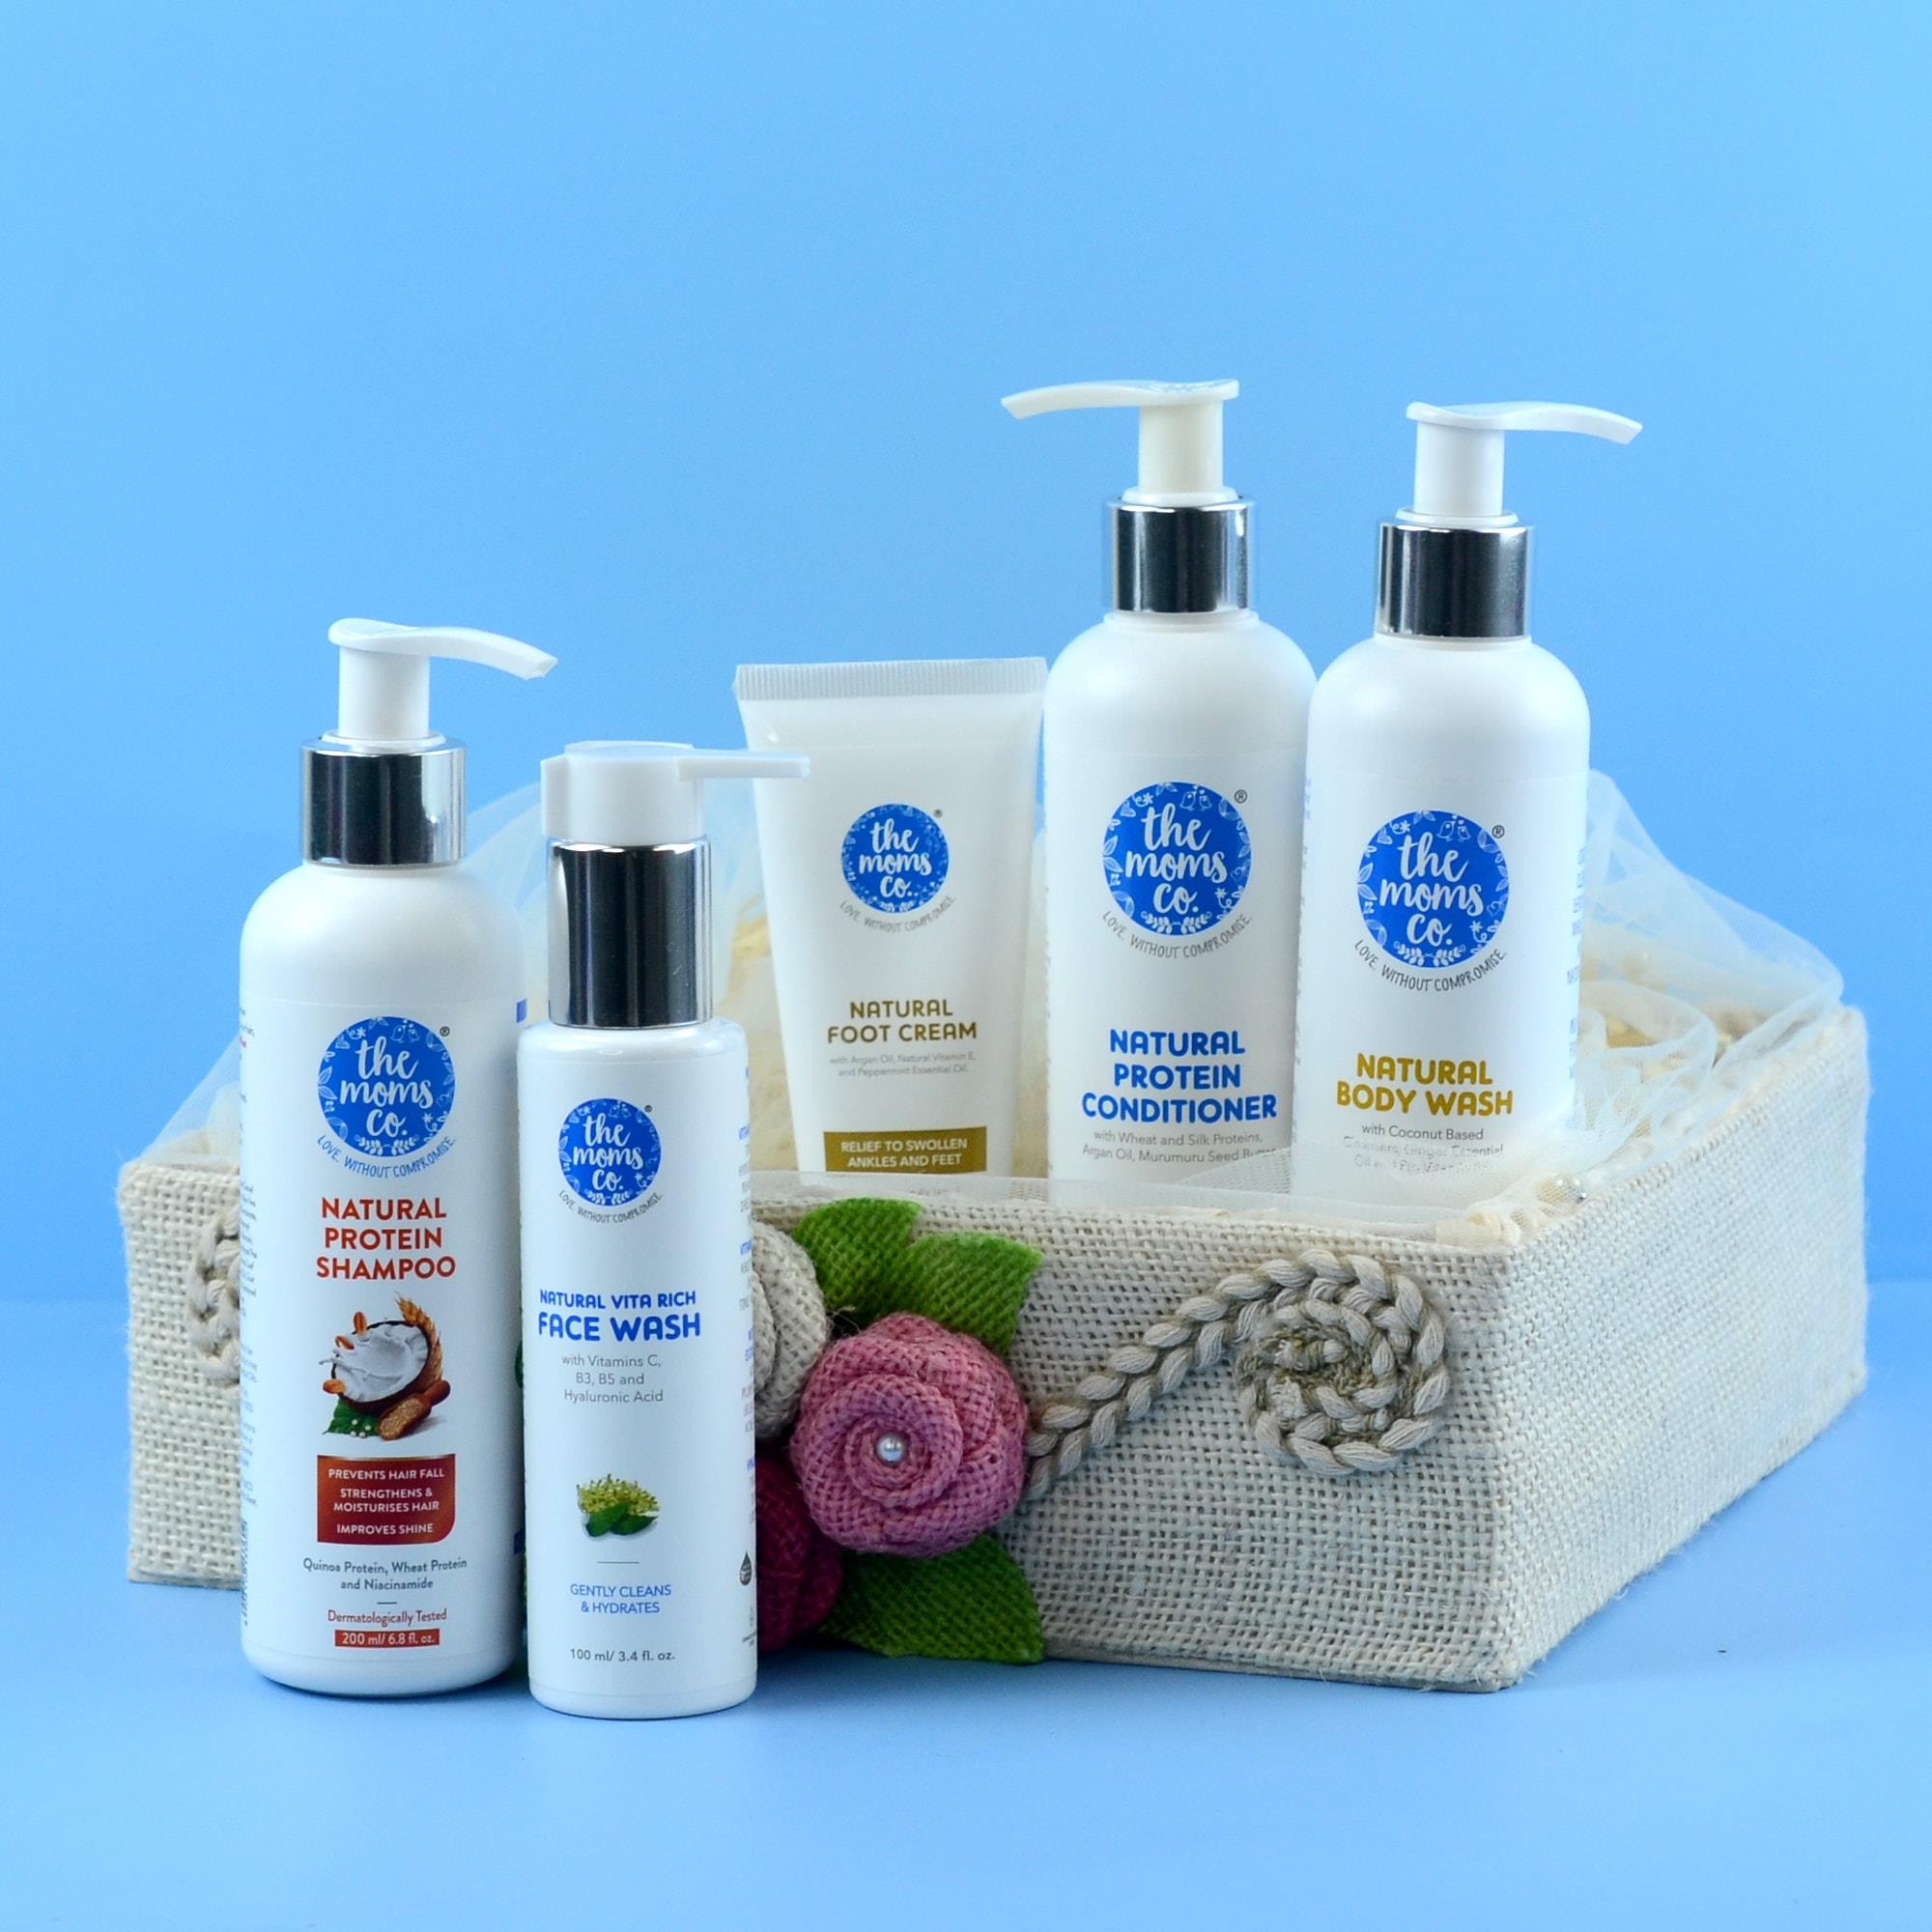 Complete Body Care Basket